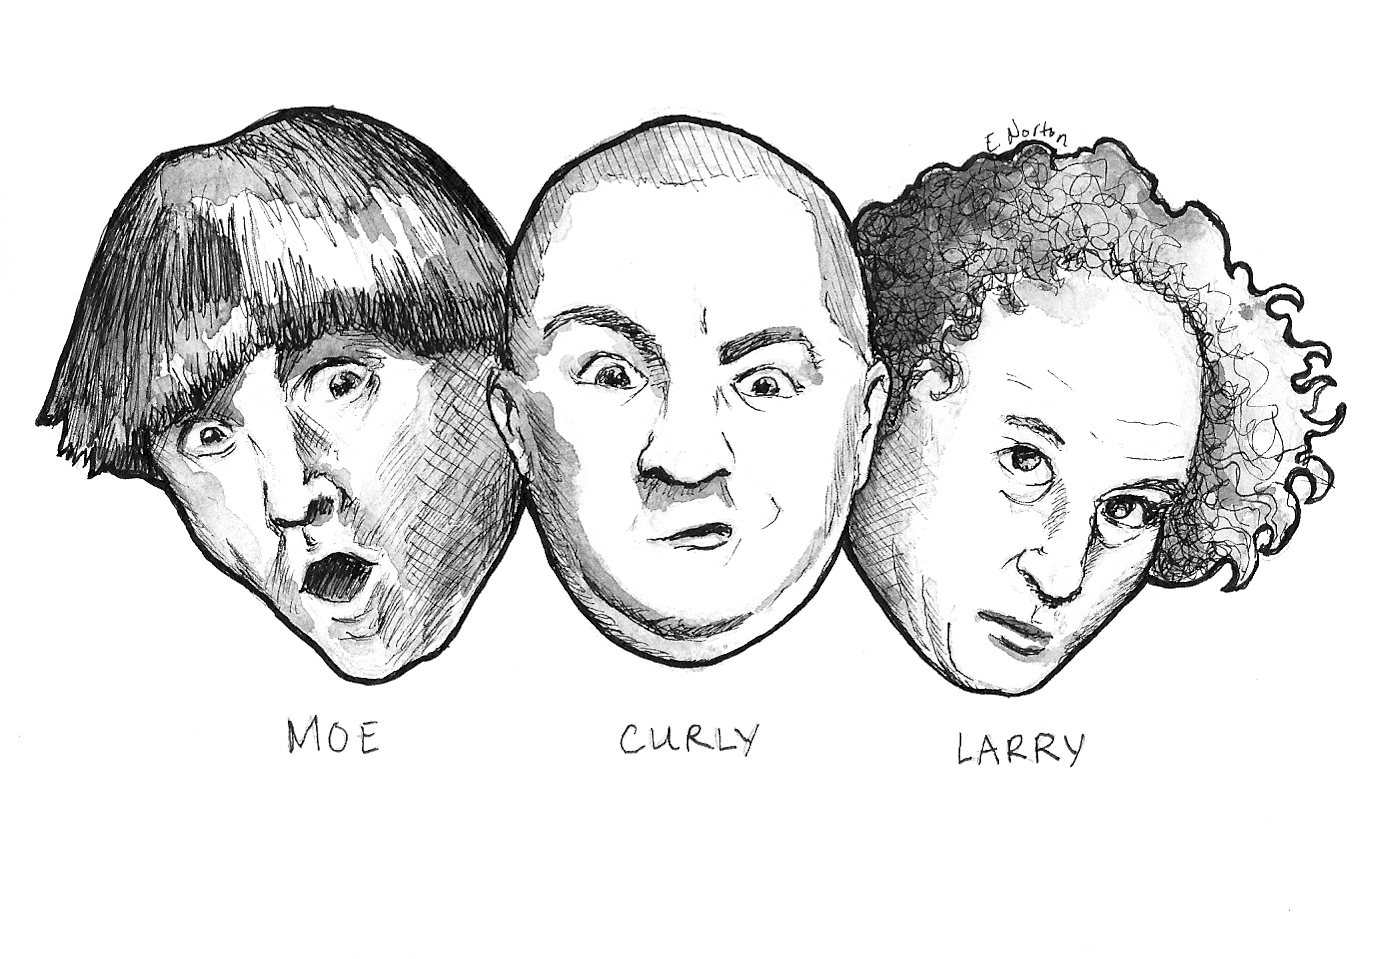 The Three Stooges Coloring Pages